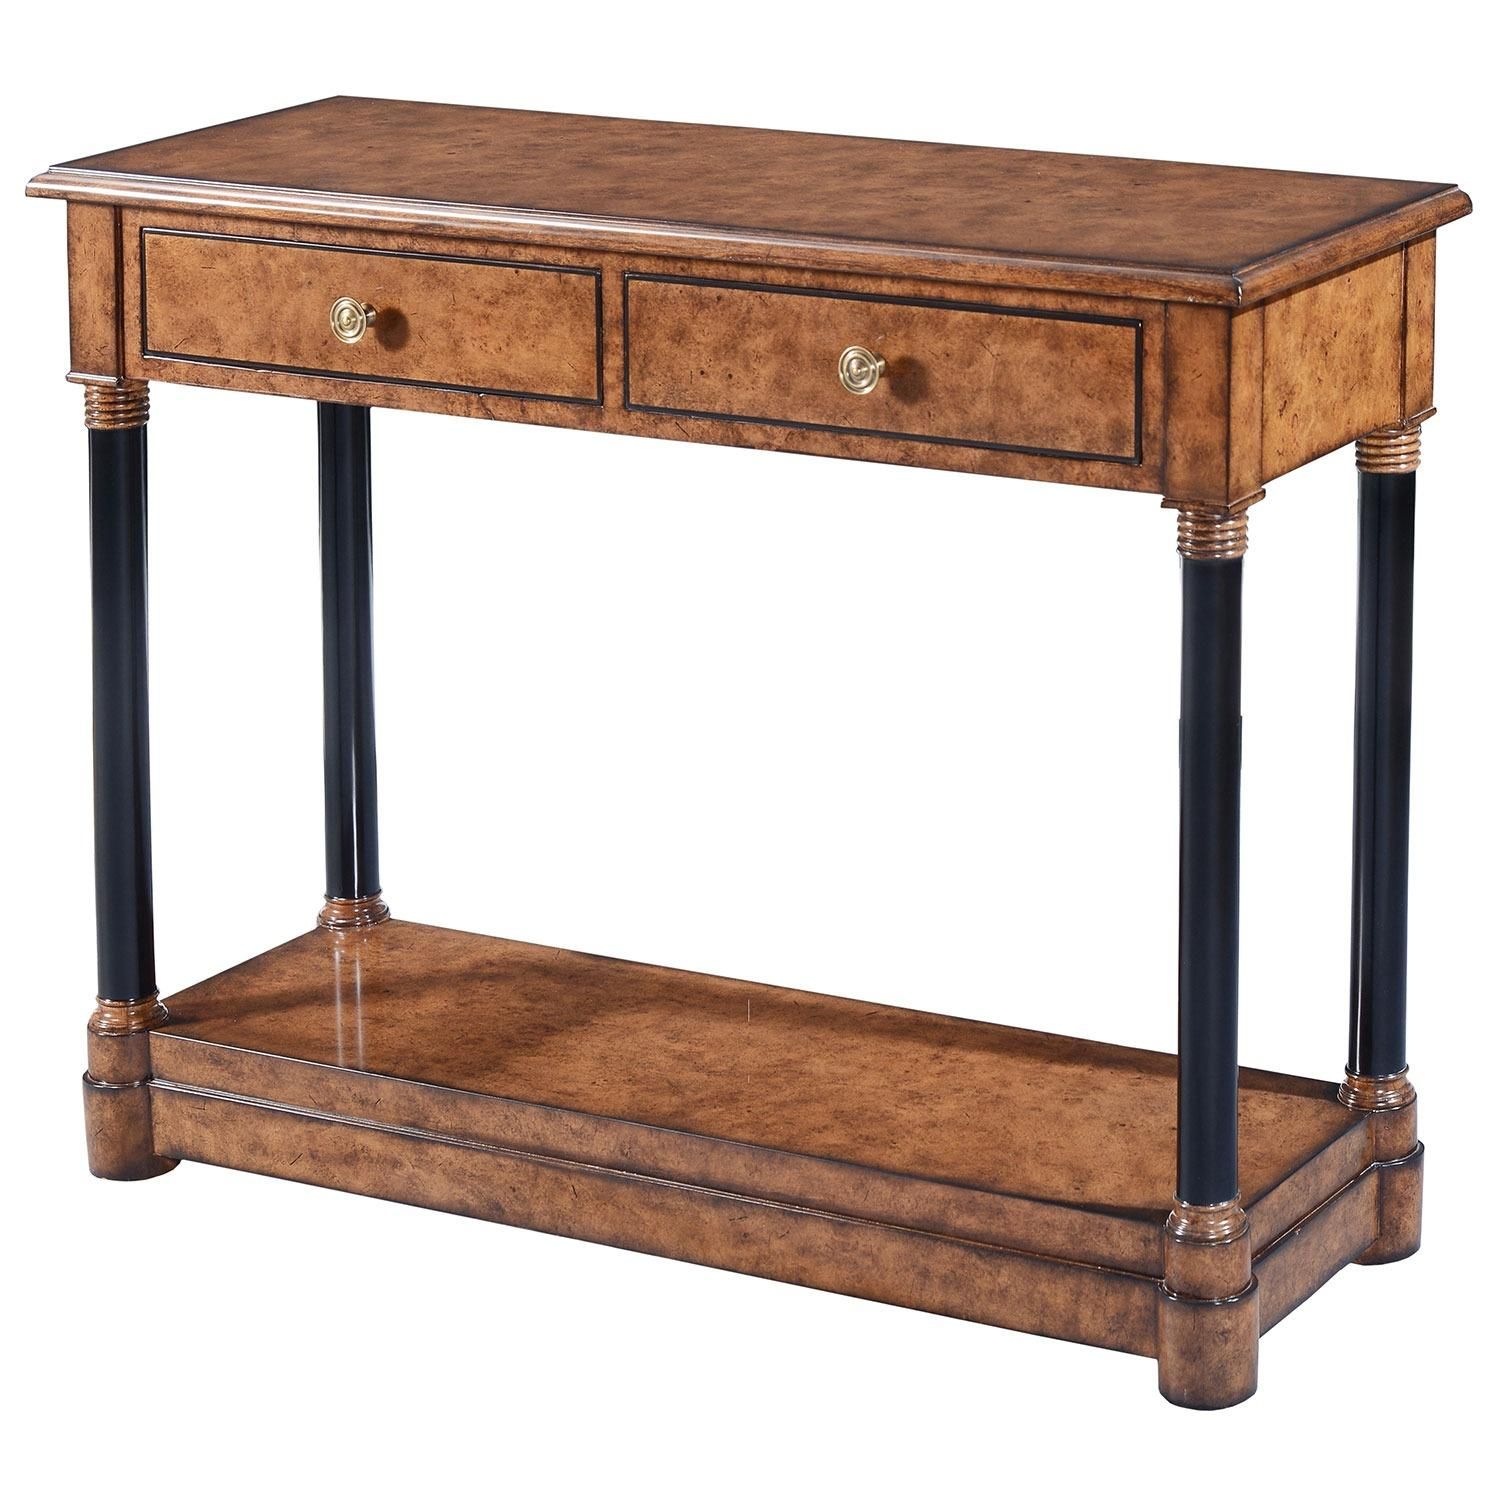 Empire Style Console Table – Burr Oak With Ebonised Legs, Console Regarding Vintage Gray Oak Console Tables (View 3 of 20)